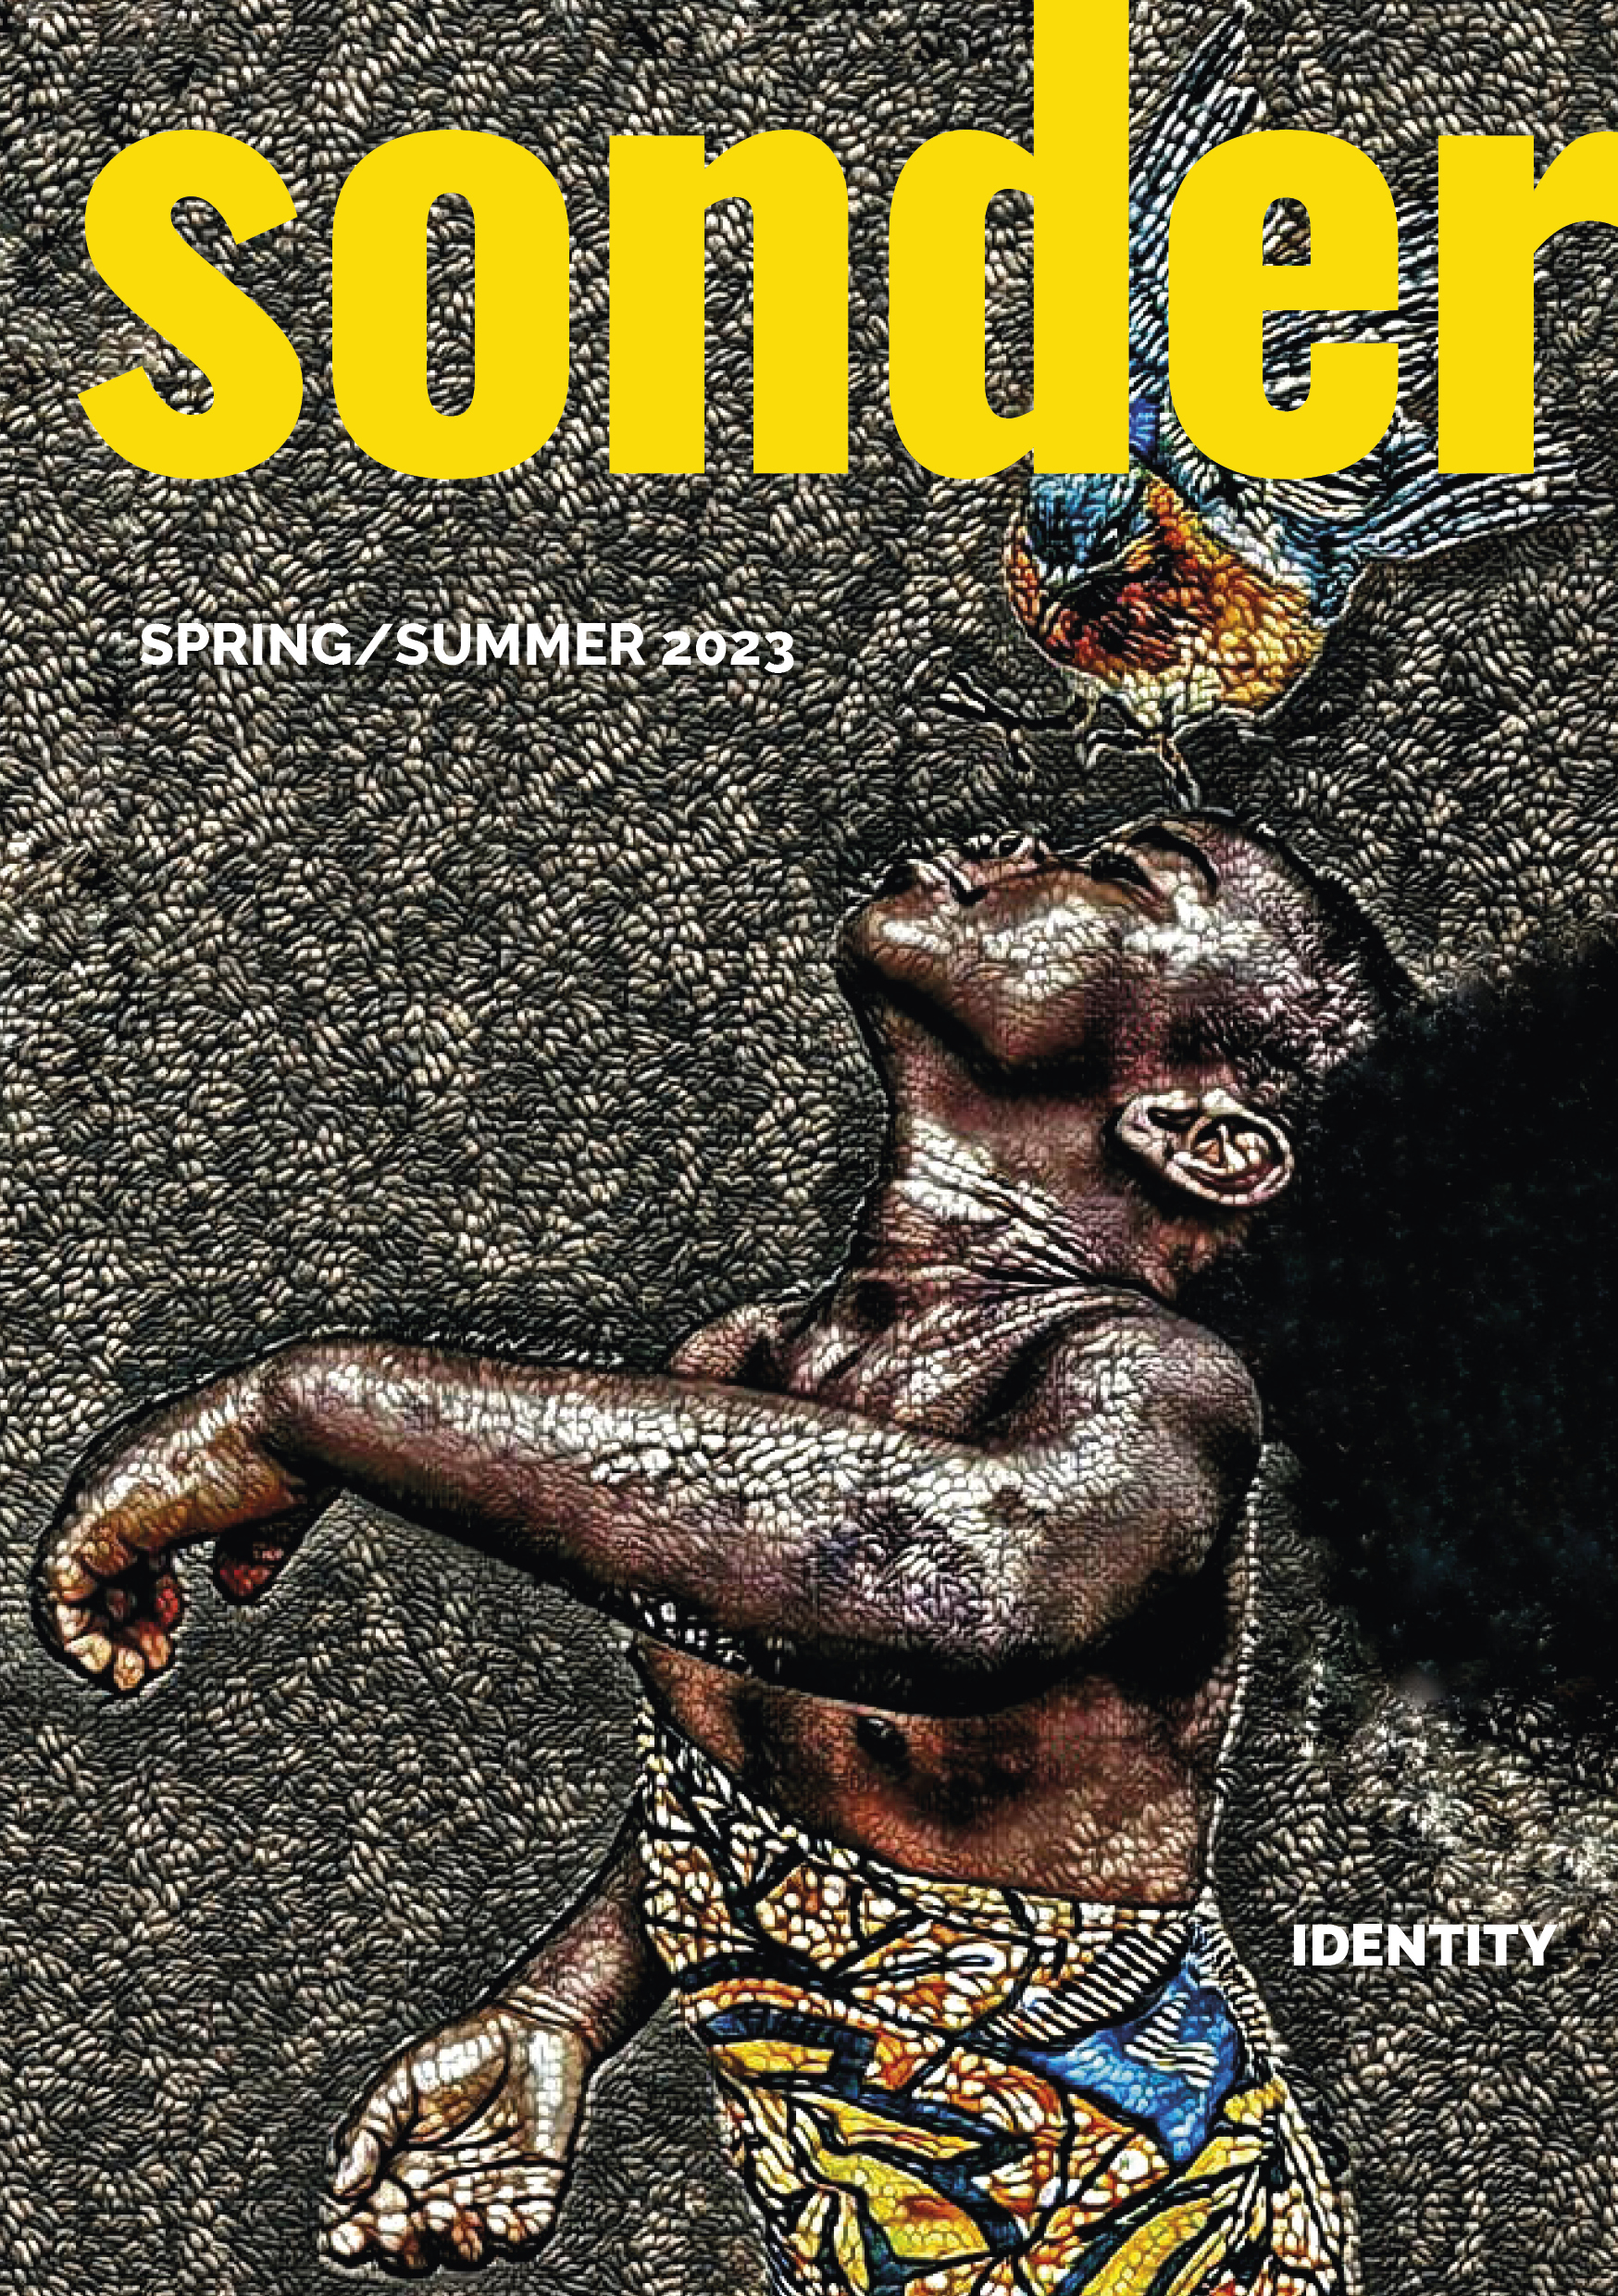 Sonder, Spring/Summer 2023 - Identity
An African girl dancing with colourful bird on head